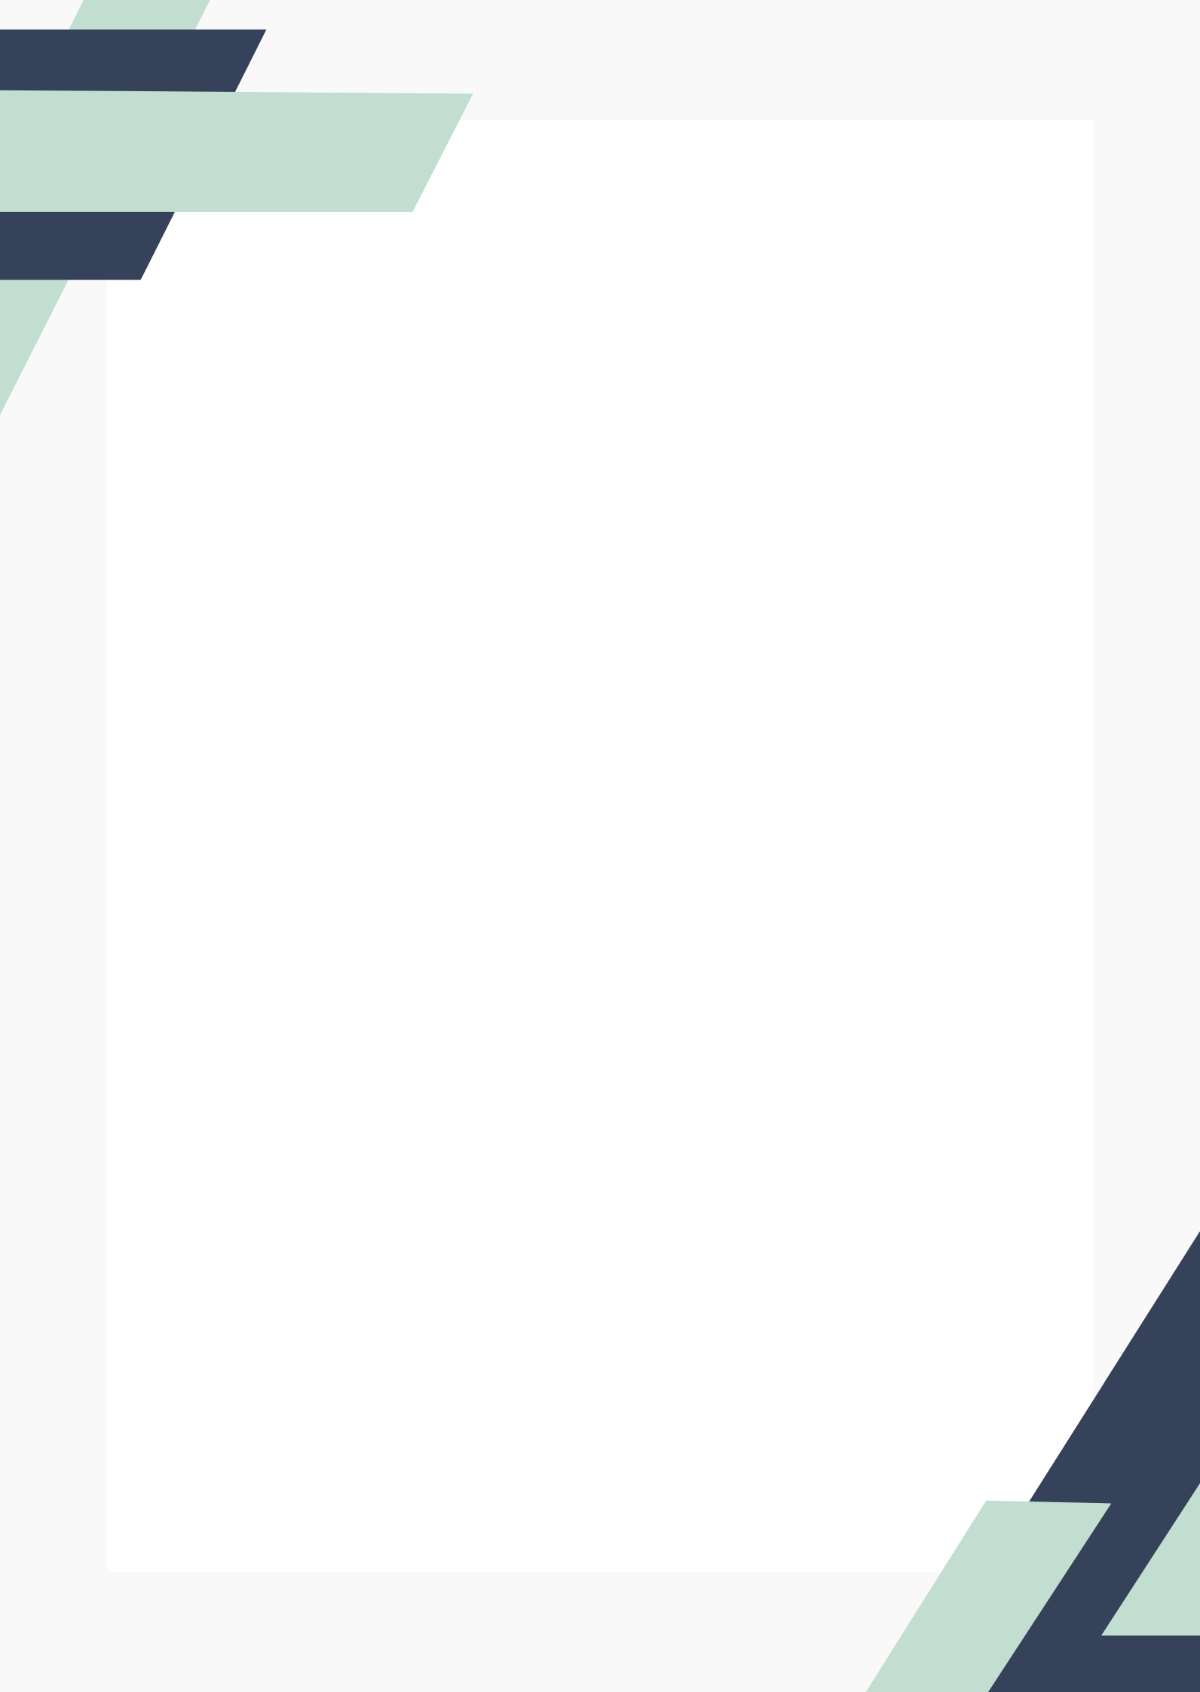 Formal Page Border Template